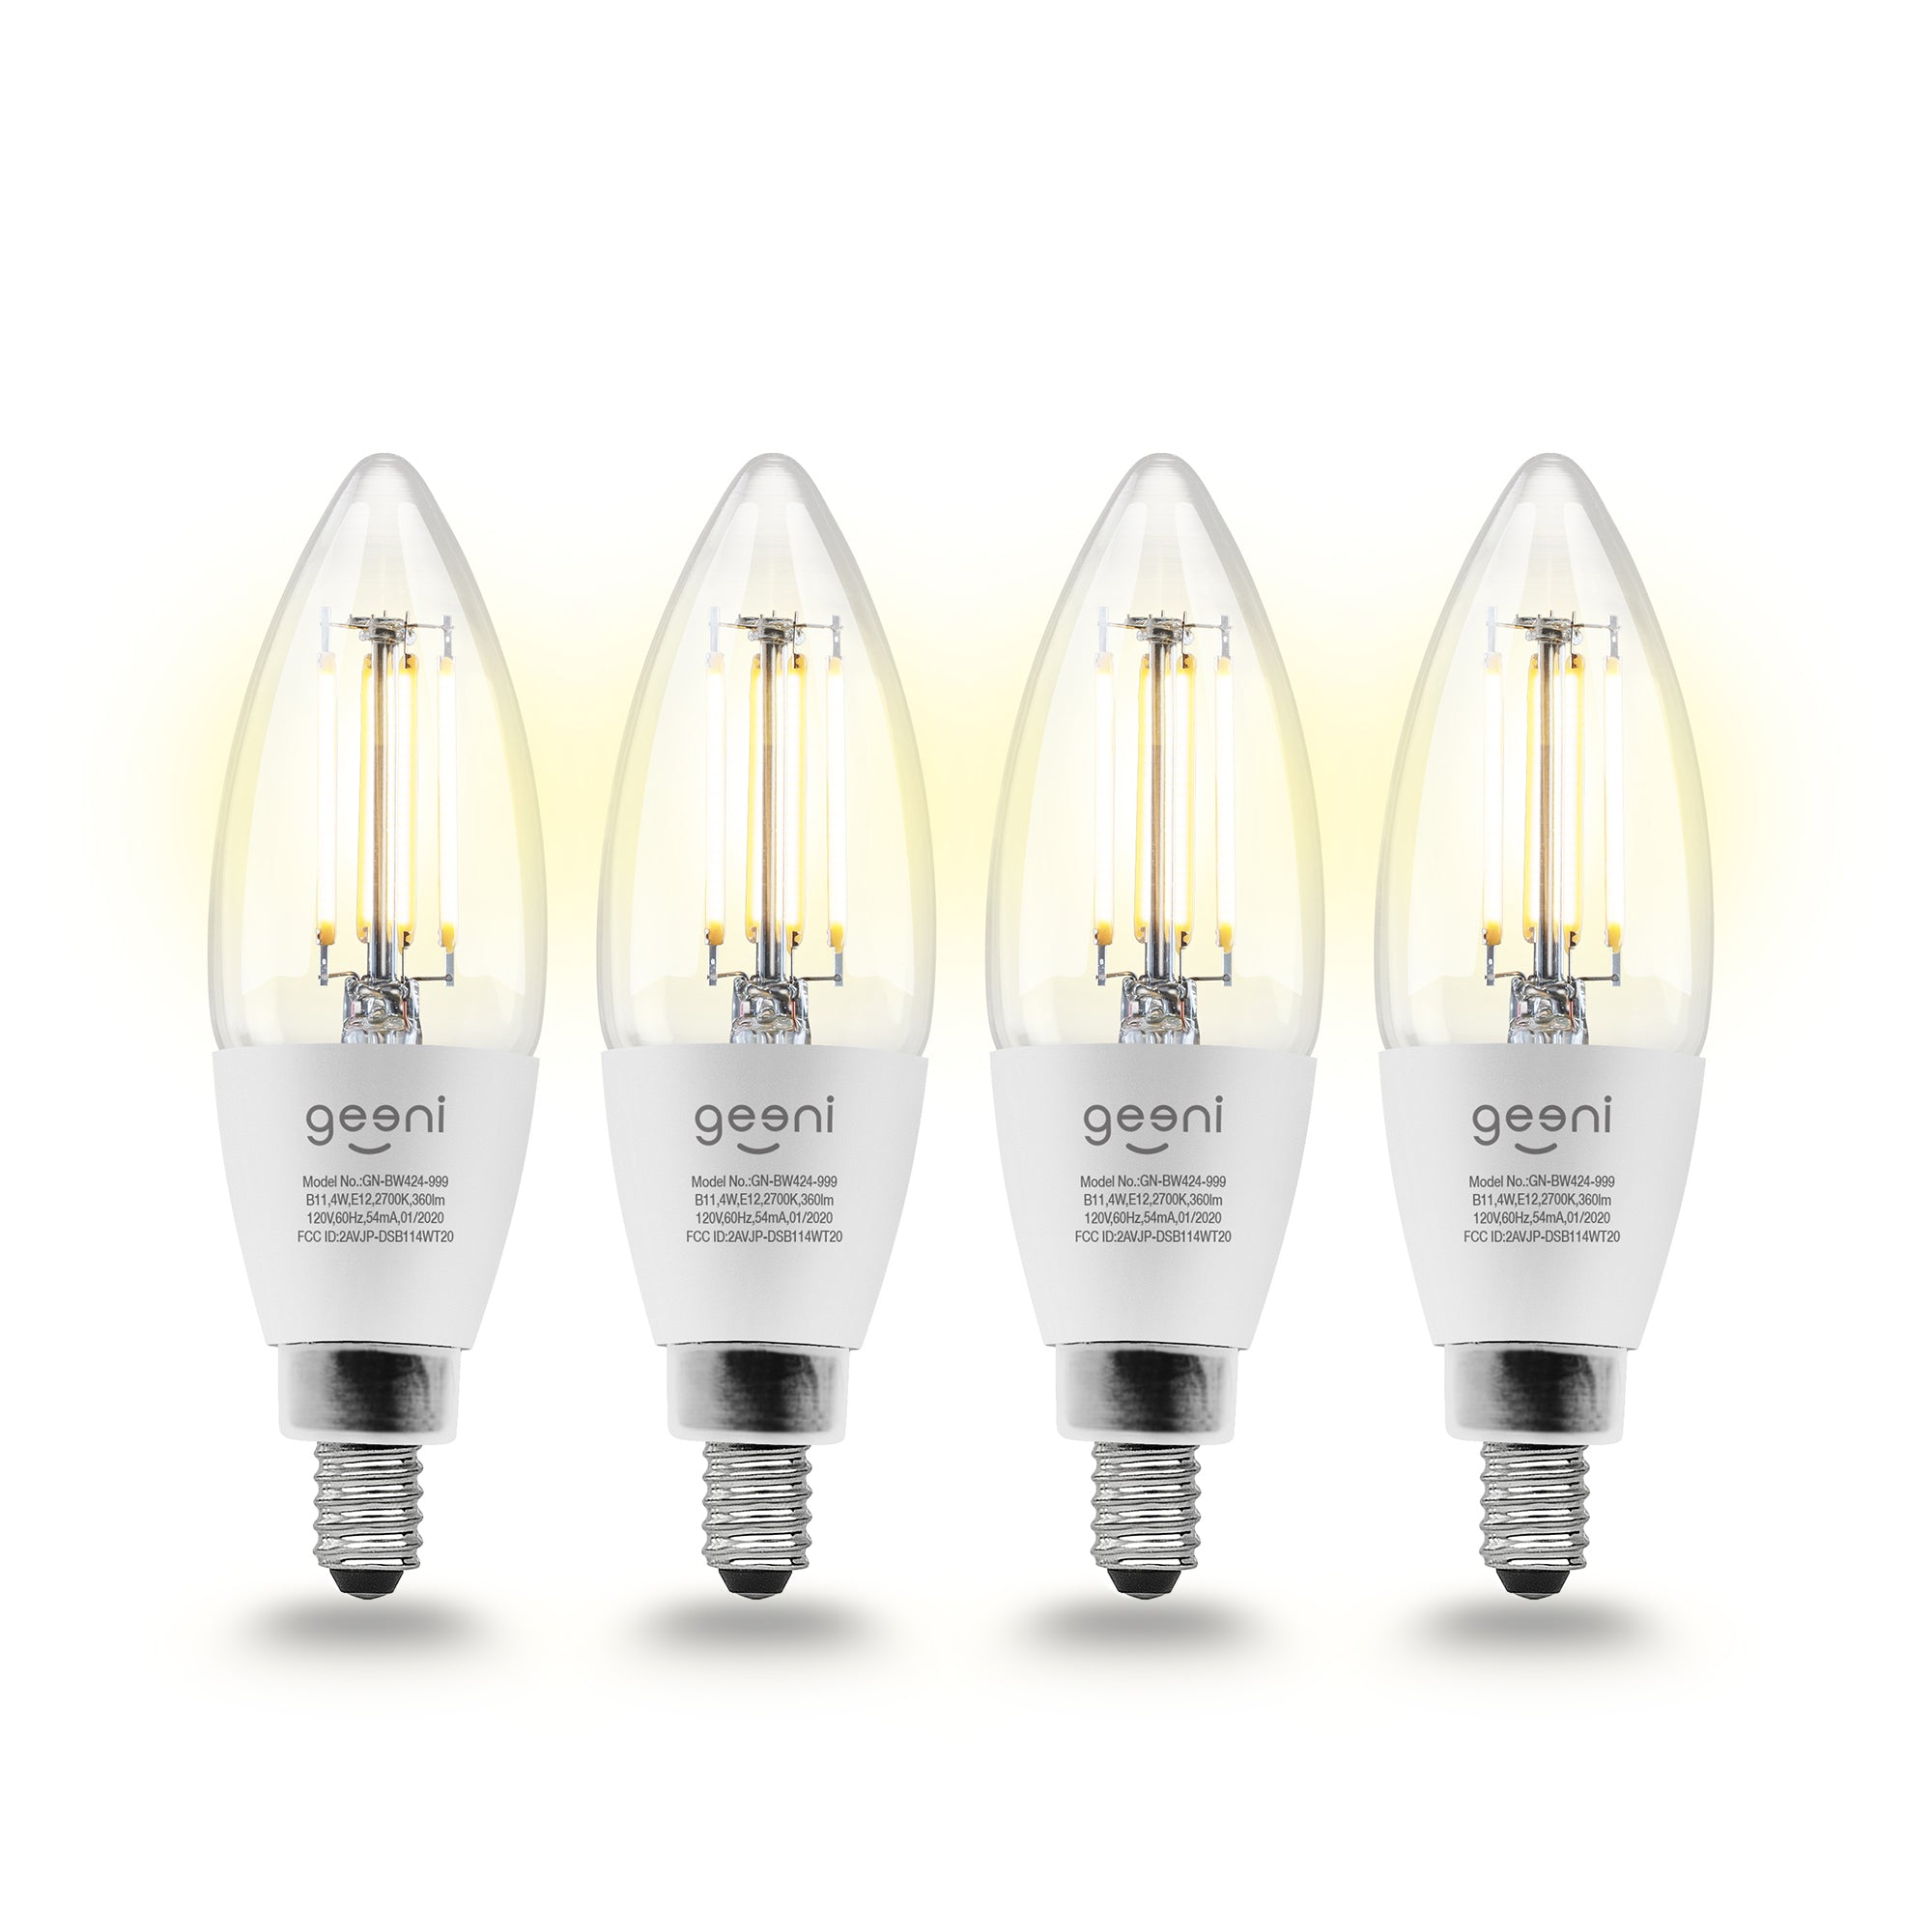 Geeni LUX Edison 40W Equivalent Warm White Dimmable B11 E12 Filament Smart LED Bulb (4-Pack)